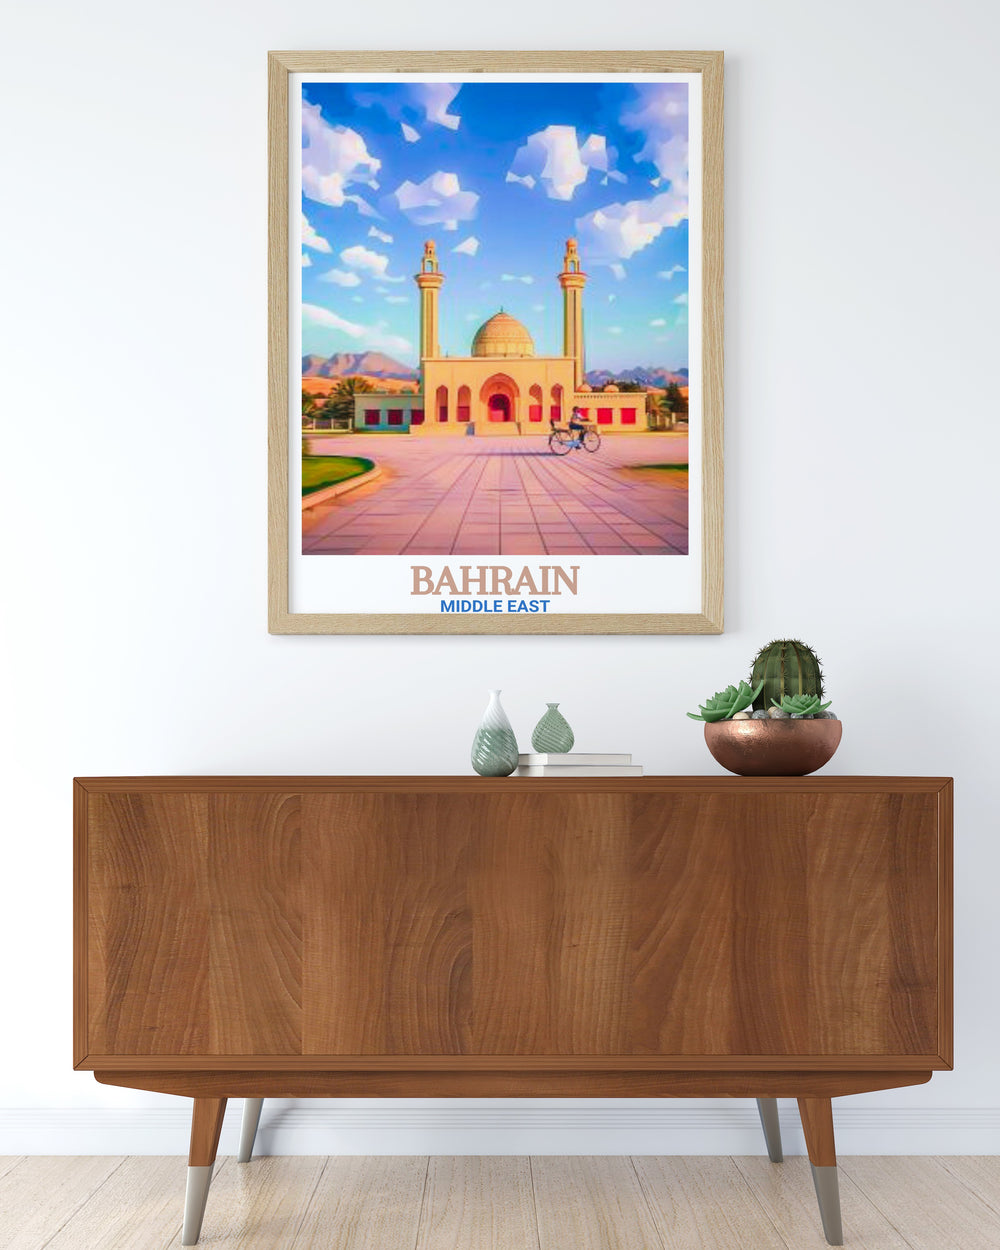 Beautiful Bahrain Poster showcasing Al Fateh Grand Mosque with exquisite detail ideal for wall hanging or as a gift that celebrates the cultural richness and architectural marvels of Bahrain.